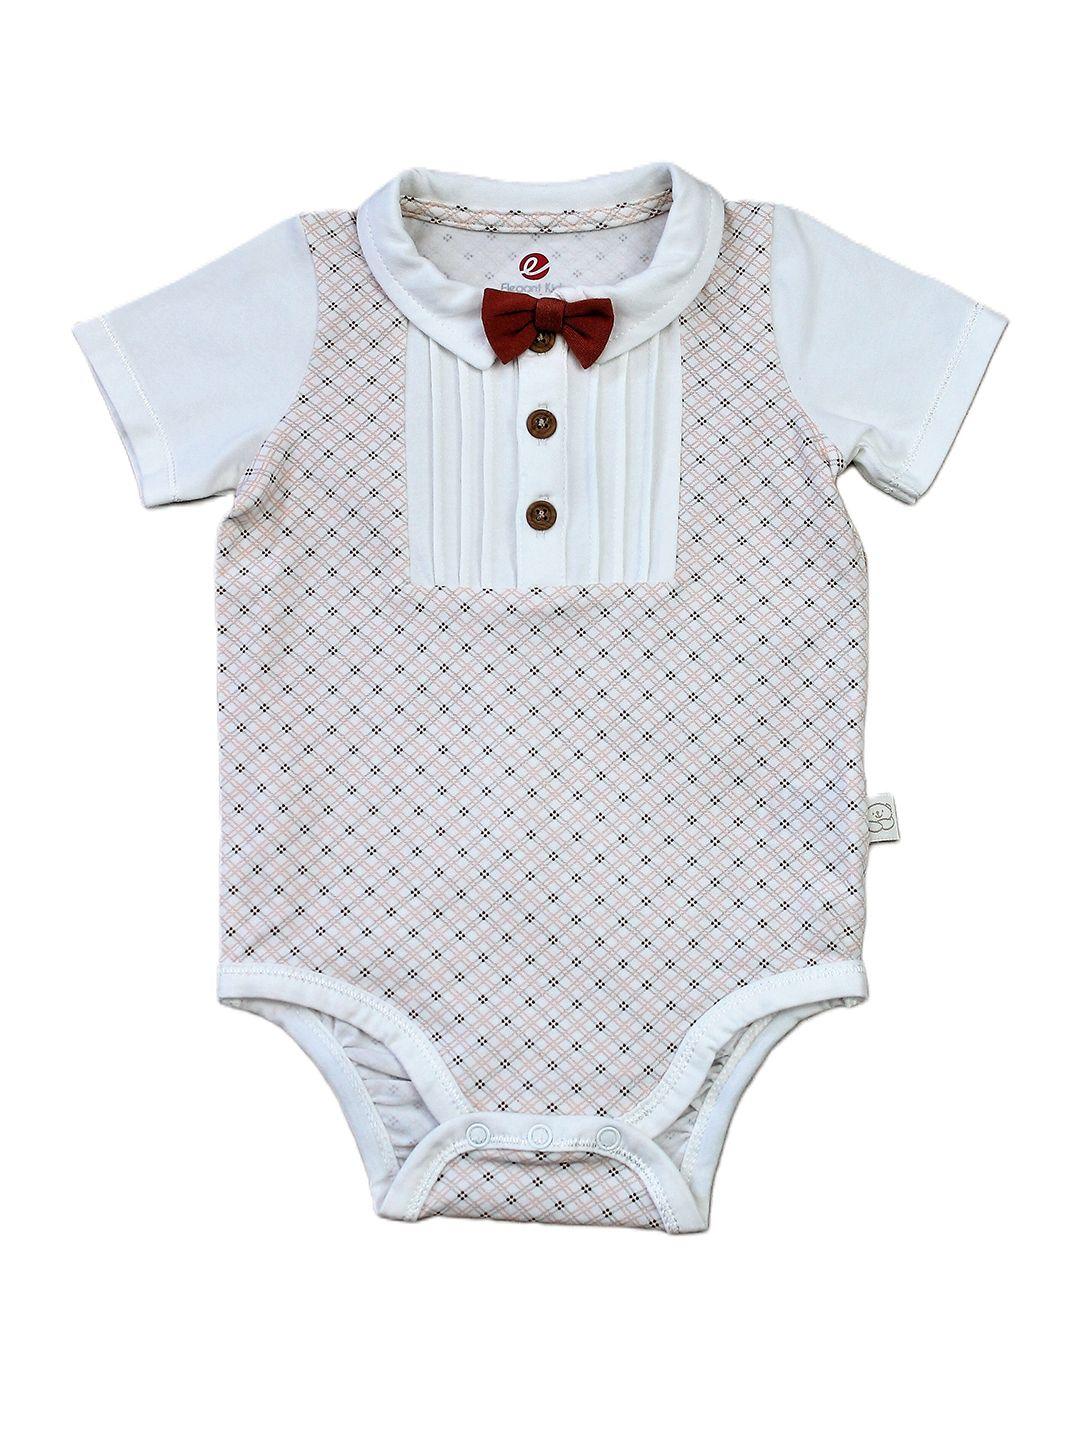 baesd infants printed romper with bow tie & pin stripe